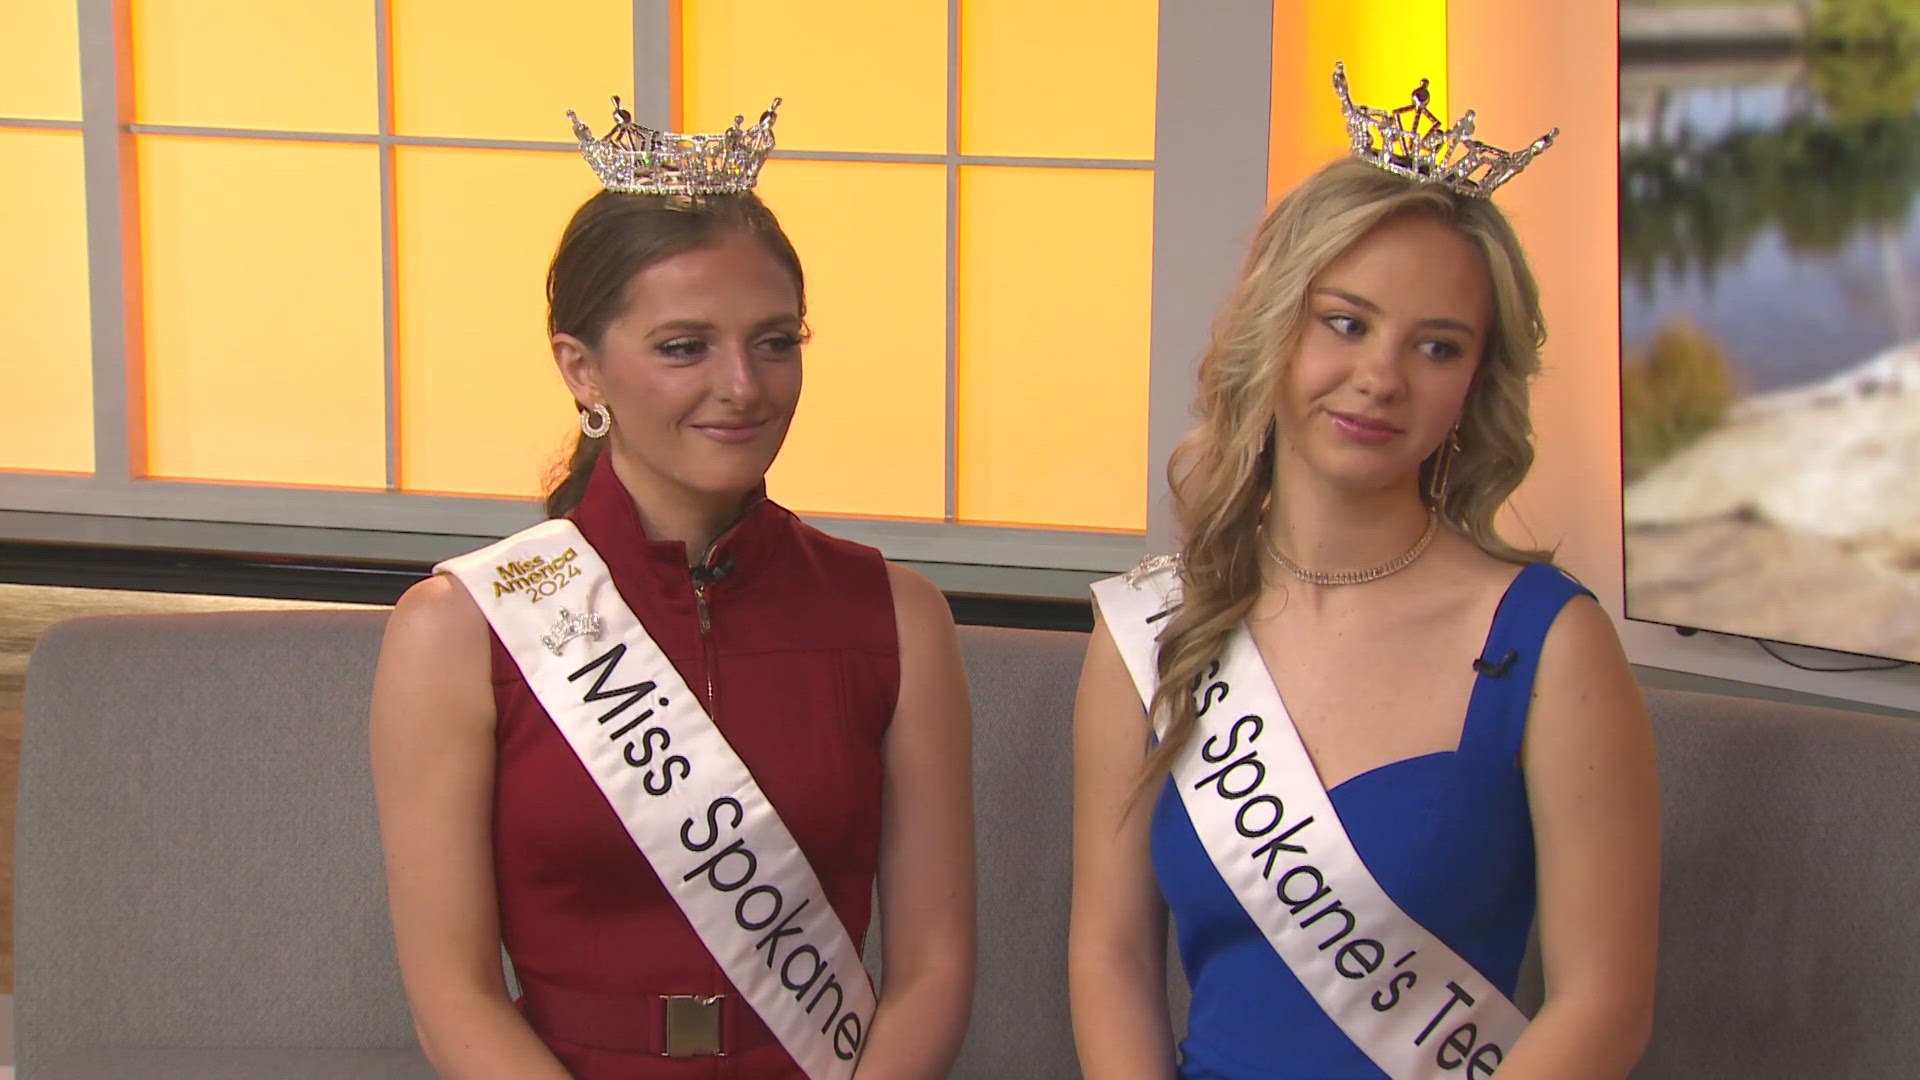 The teens will compete first with the winner being crowned on Saturday, June 29 and the Miss Washington pageant will crown a winner on Saturday, July 6.